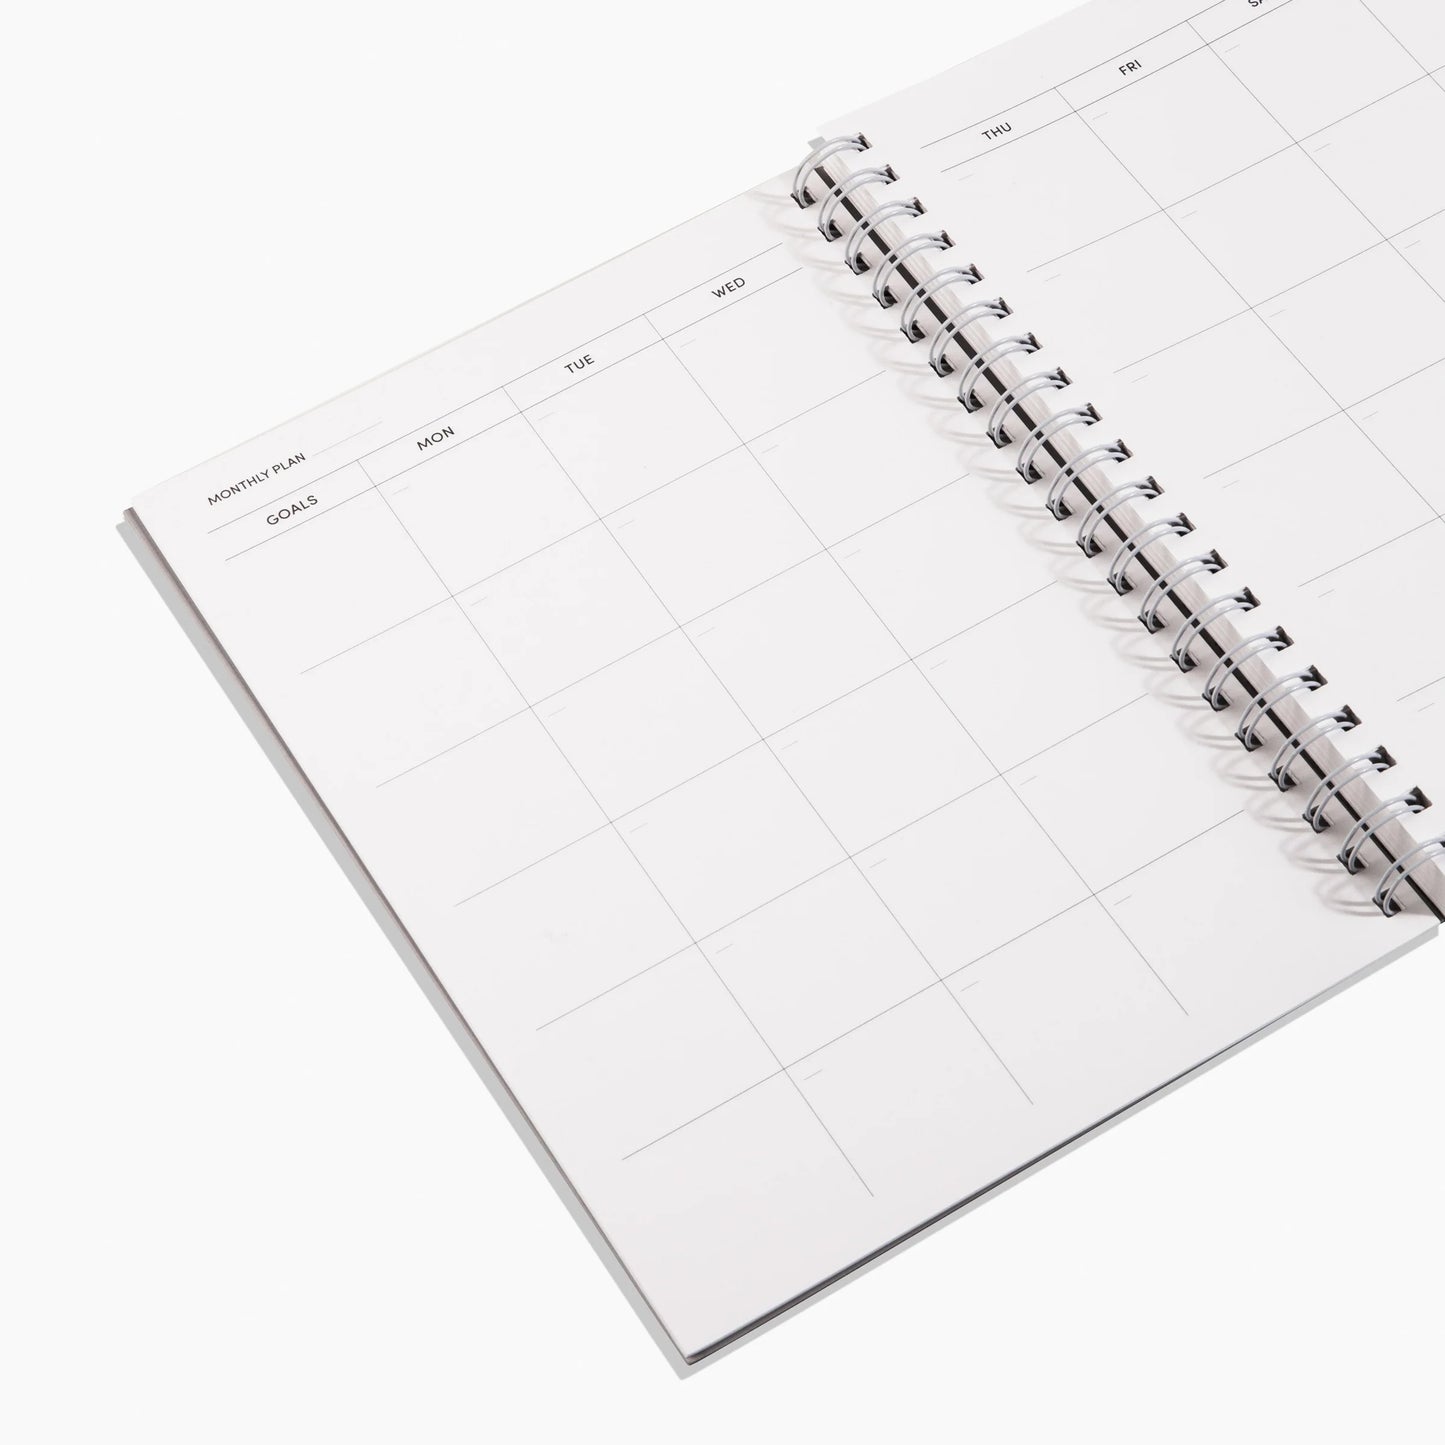 Small Daily Weekly Monthly Planner